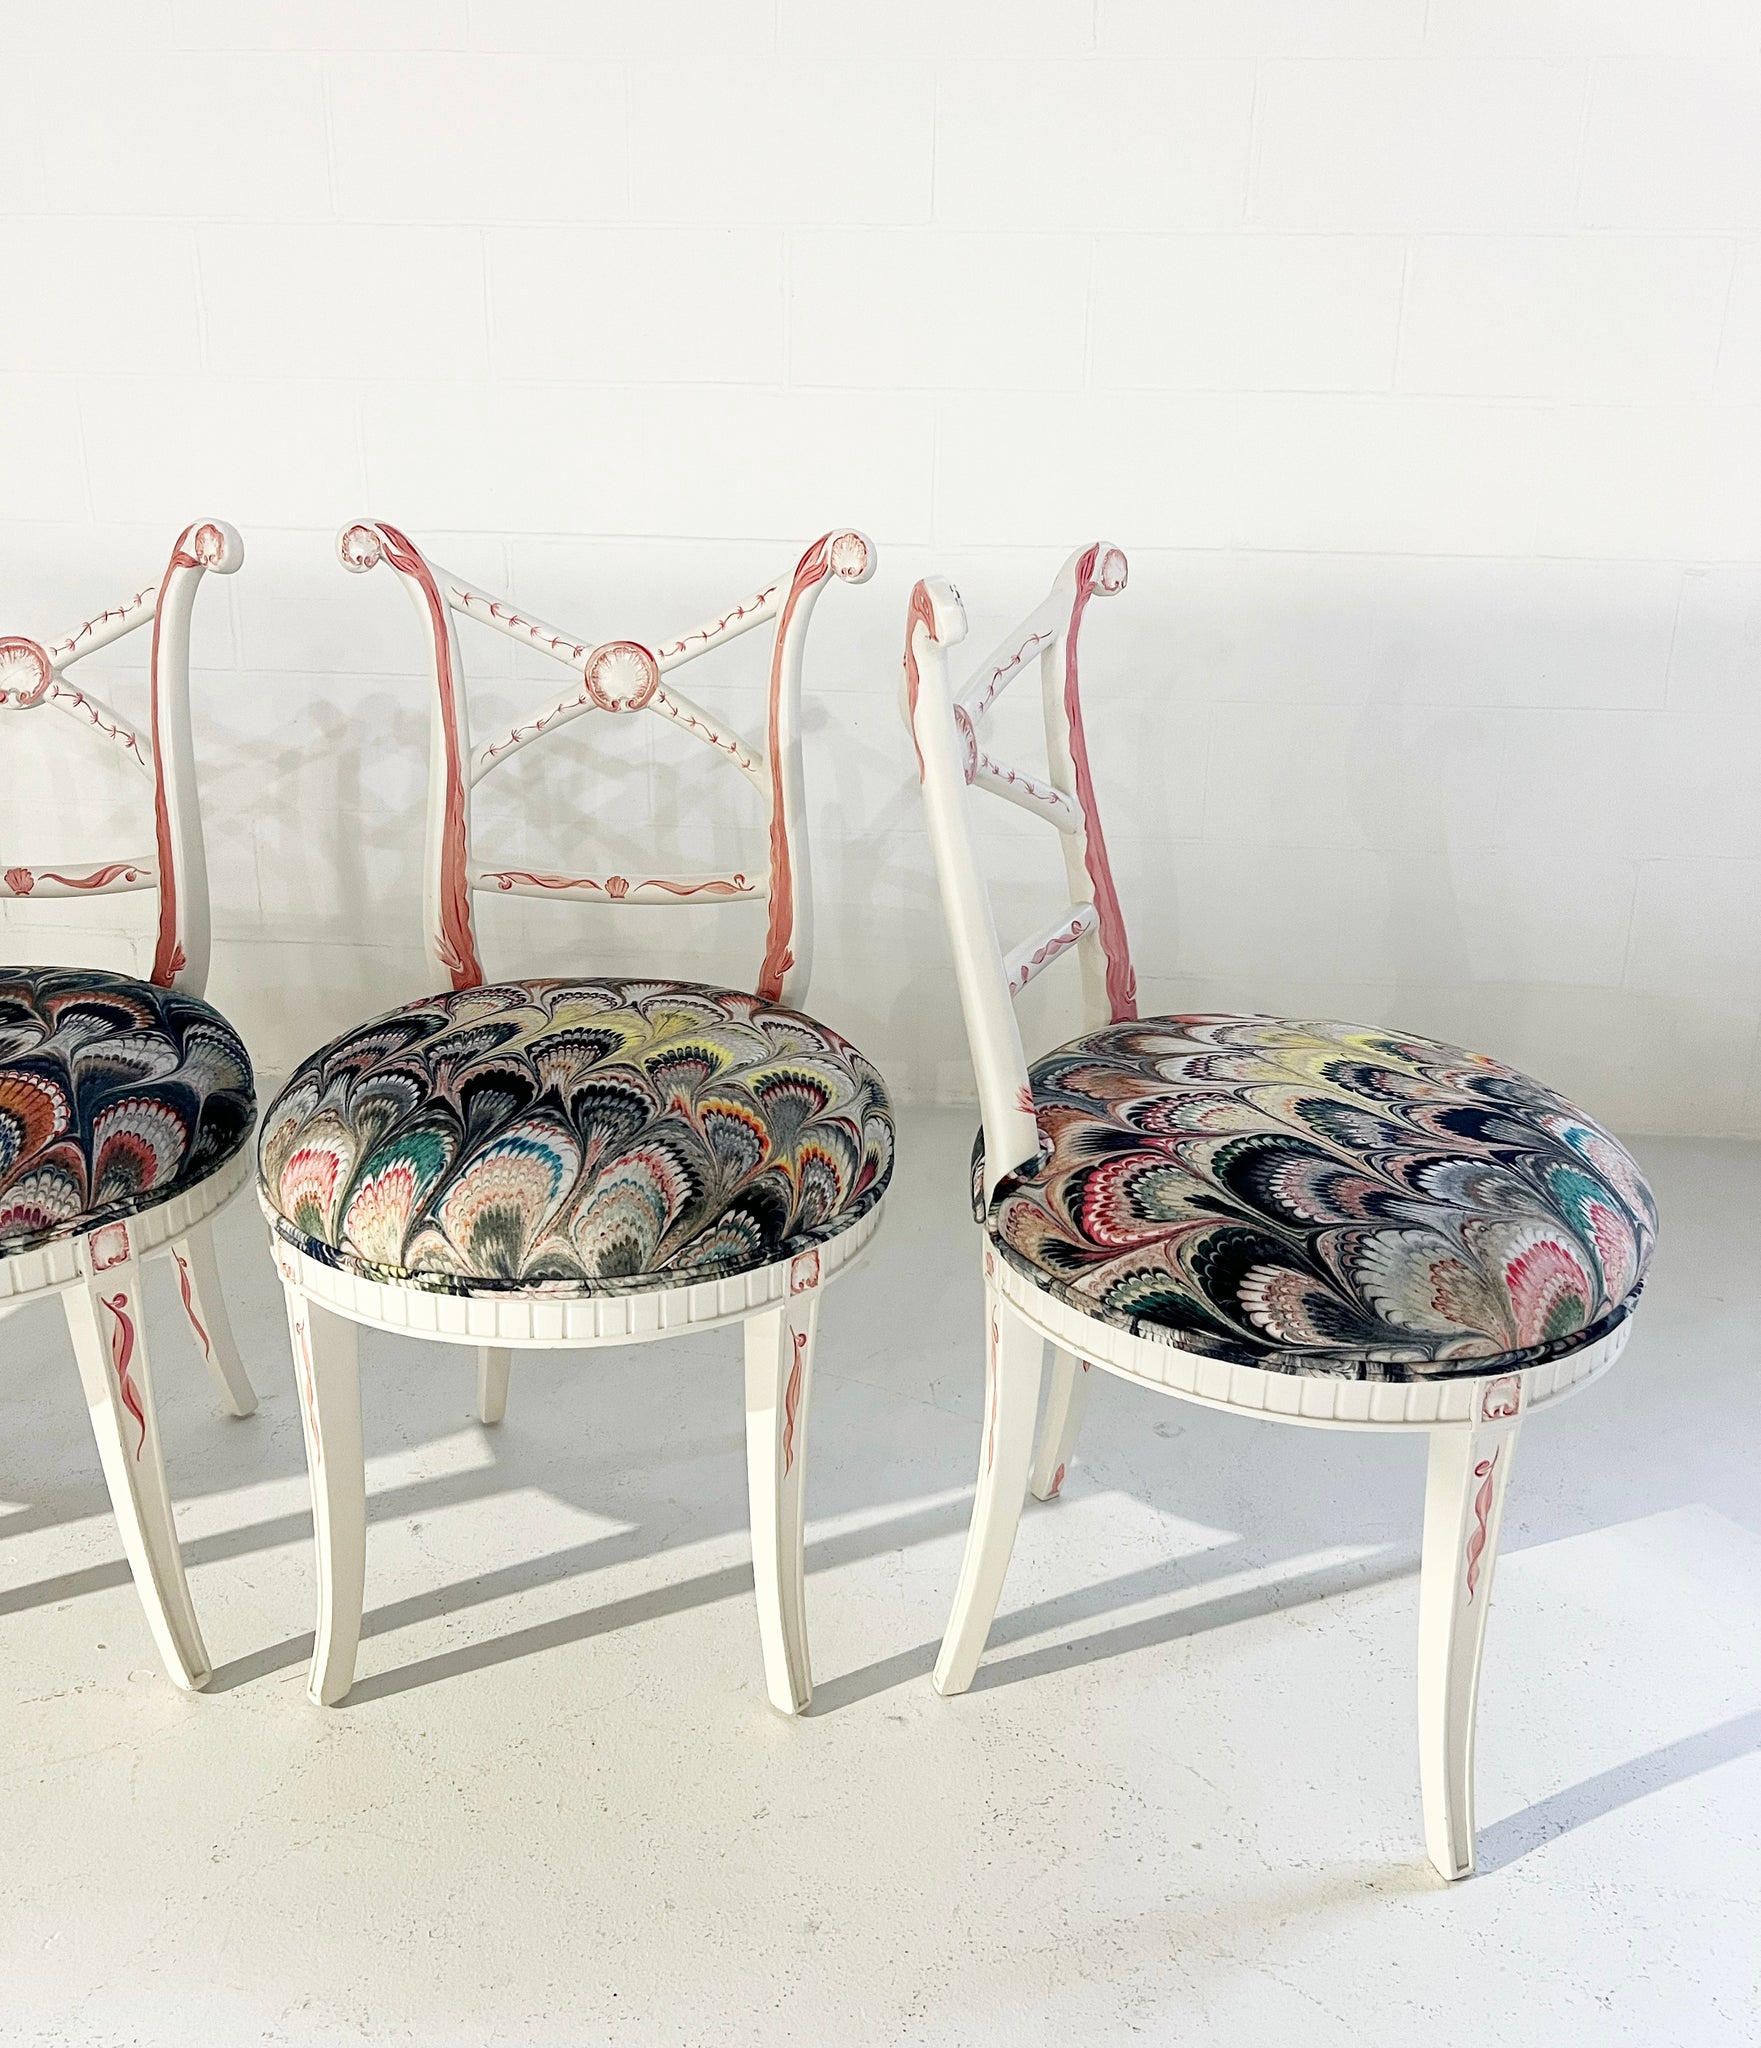 One-of-a-Kind, Hand-Painted 'Sea Monsters' Chairs, Set of 4